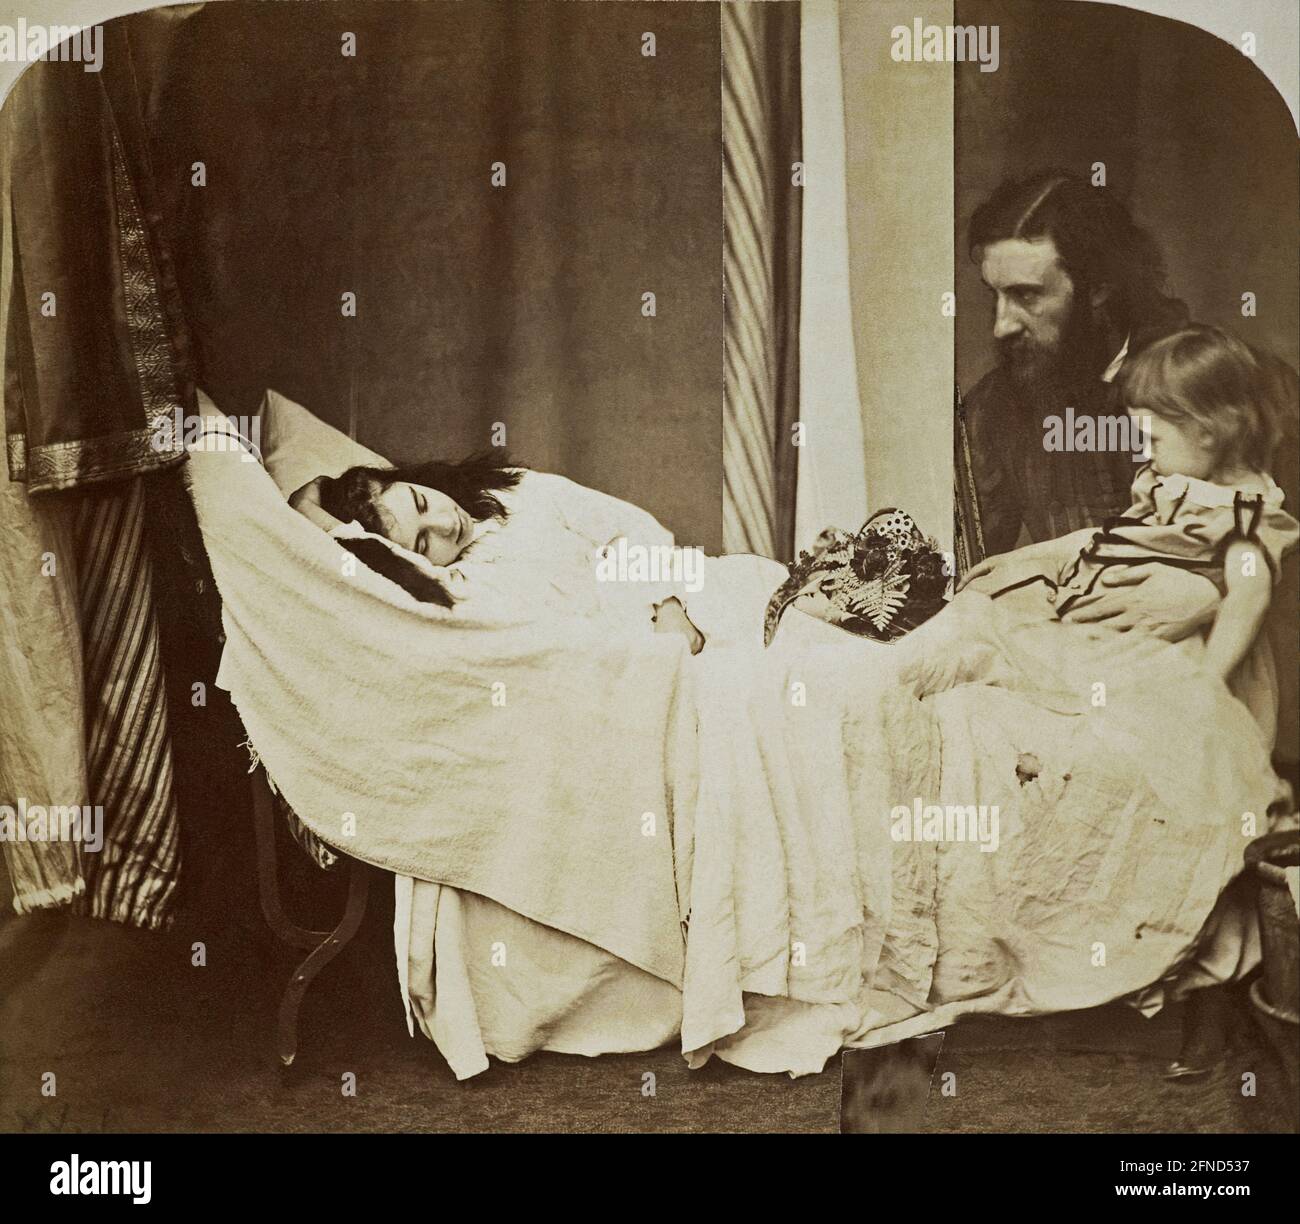 1864 , GREAT BRITAIN : Collage photomontage titled ' Mary Josephine MacDonald dreaming of her father ( George MacDonald ) and brother Ronald ' by photographer and writer LEWIS CARROL ( 1832 - 1898 ). The scotish poet and  Fantasy writer GEORGE MacDONALD ( 1824 - 1905 ).  He was a pioneering figure in the field of modern fantasy literature and the mentor of fellow writer Lewis Carroll. and inspiration for the future work of J.R.R. TOLKIEN ( John Ronald Reuel , 1892 - 1973 ), author of  book THE LORD OF THE RINGS ( Il Signore degli Anelli , 1954-1955 ) . Stock Photo